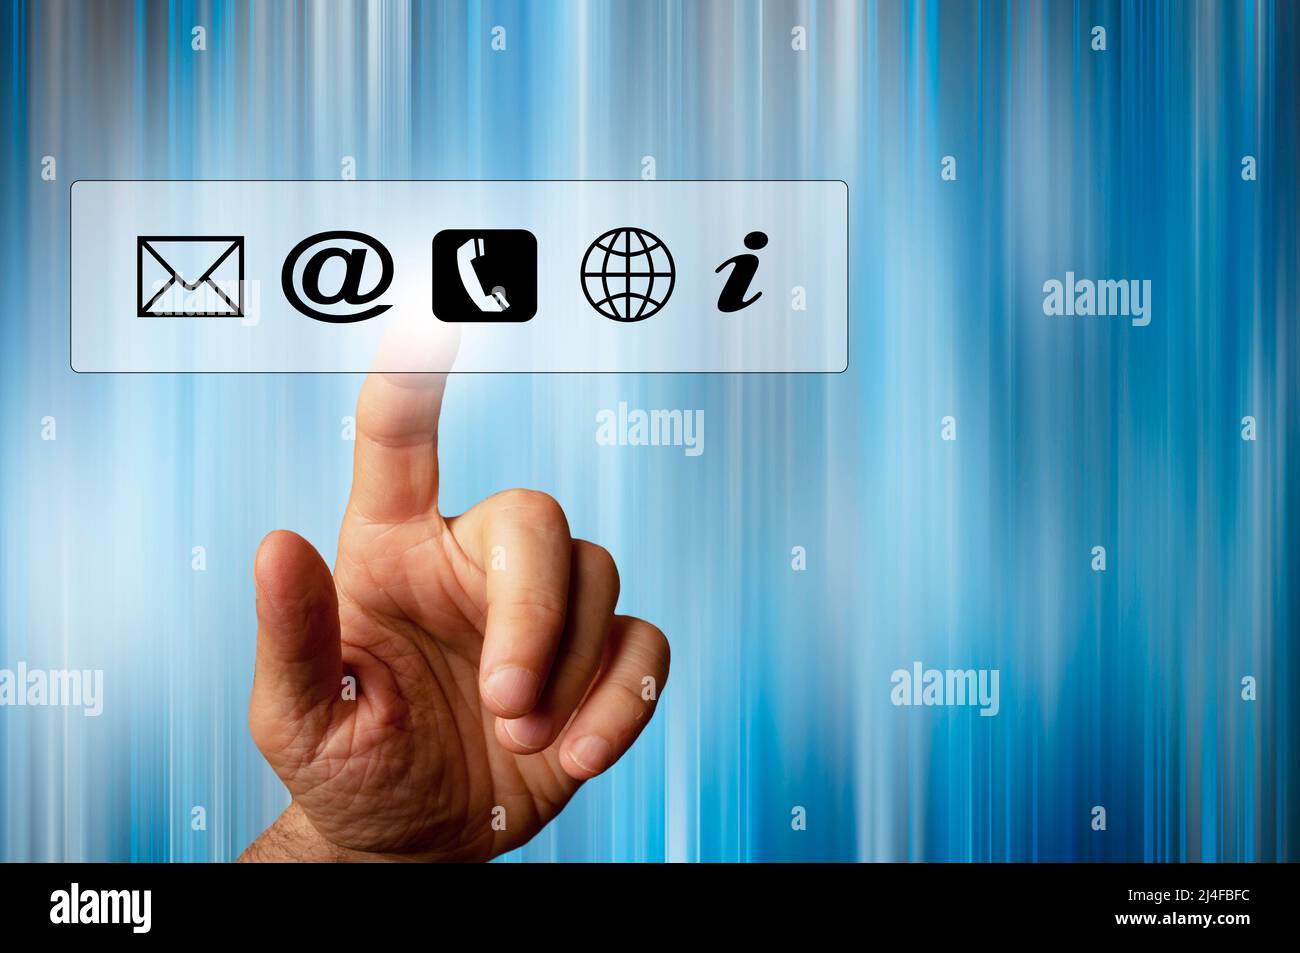 finger choosing from a set of communication icons Stock Photo